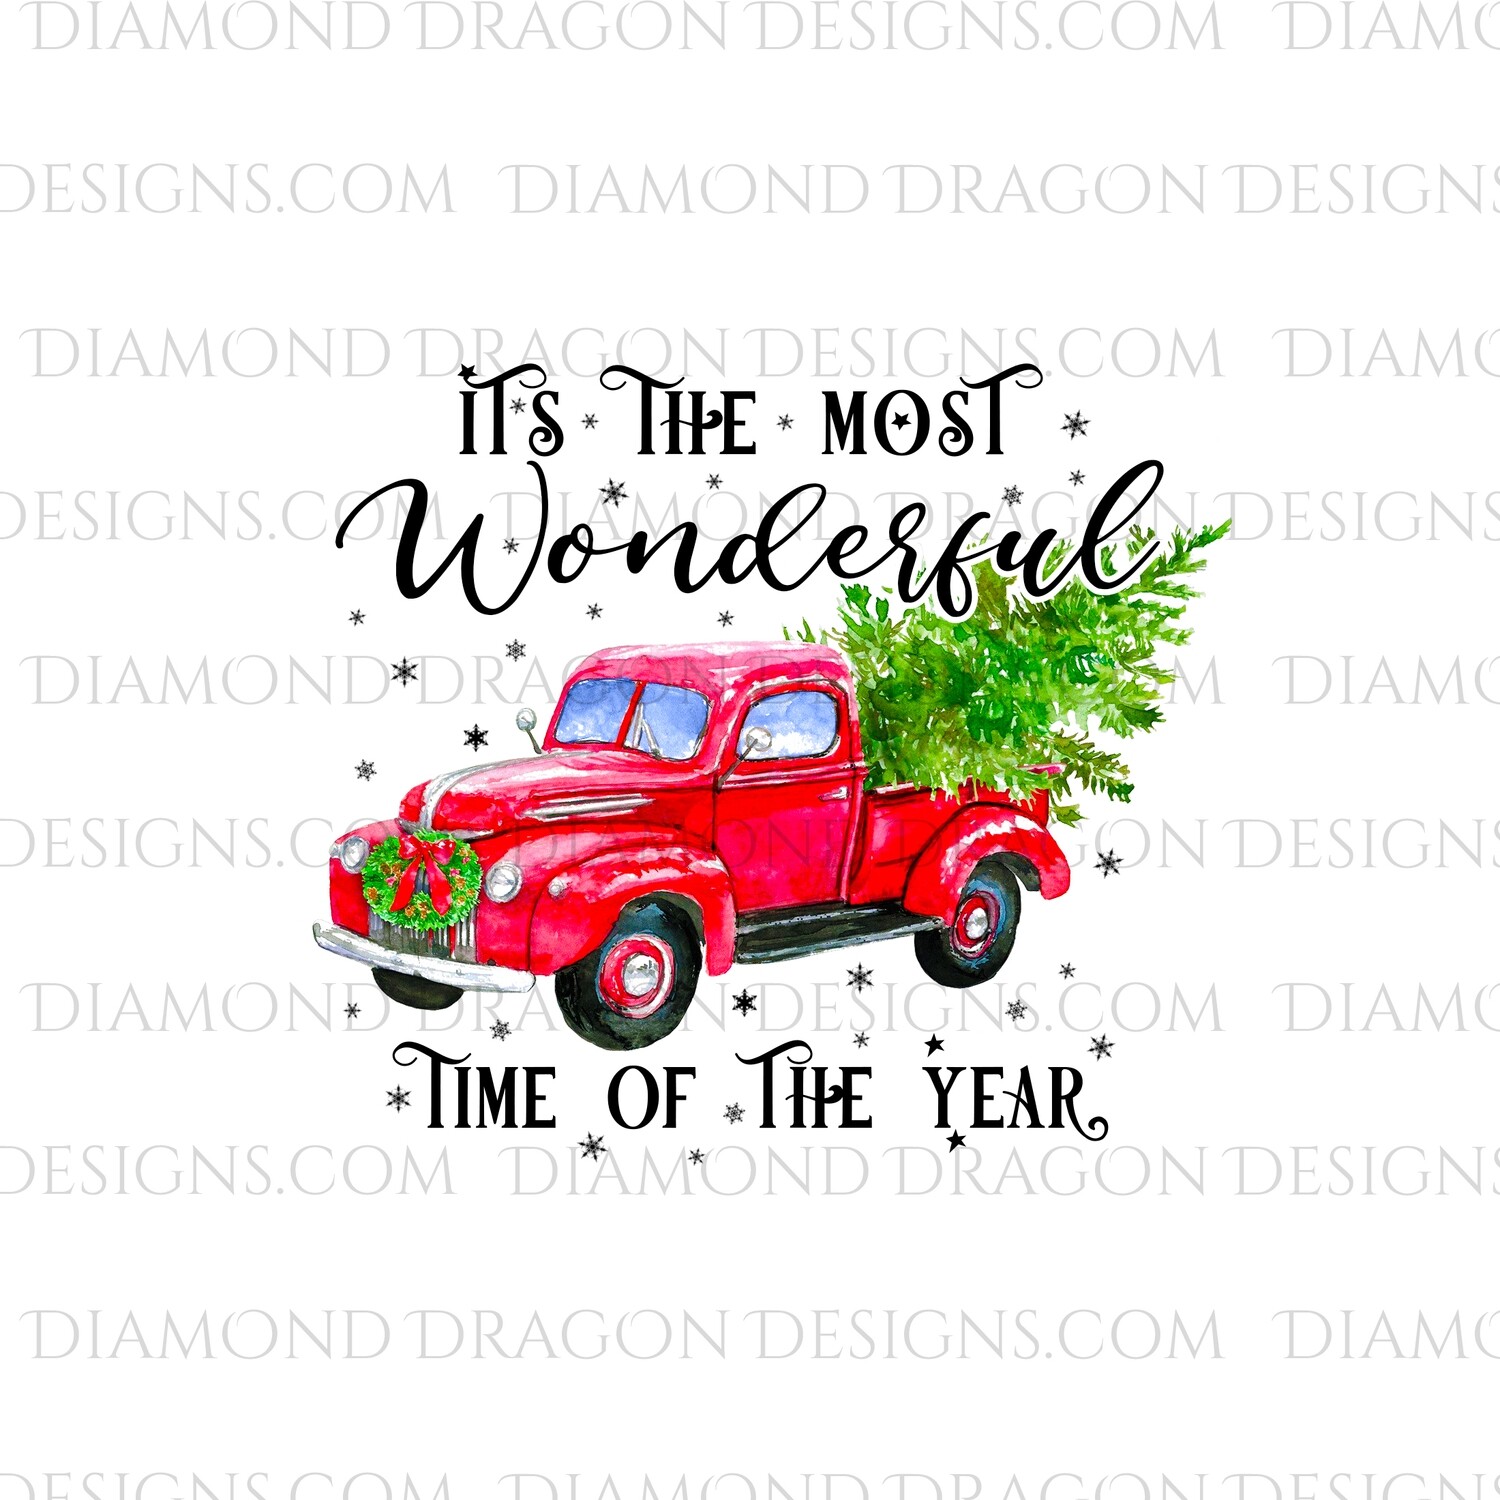 Christmas - Red Truck, Christmas Tree, It’s the most wonderful time, Red Vintage Truck 3, Digital Image